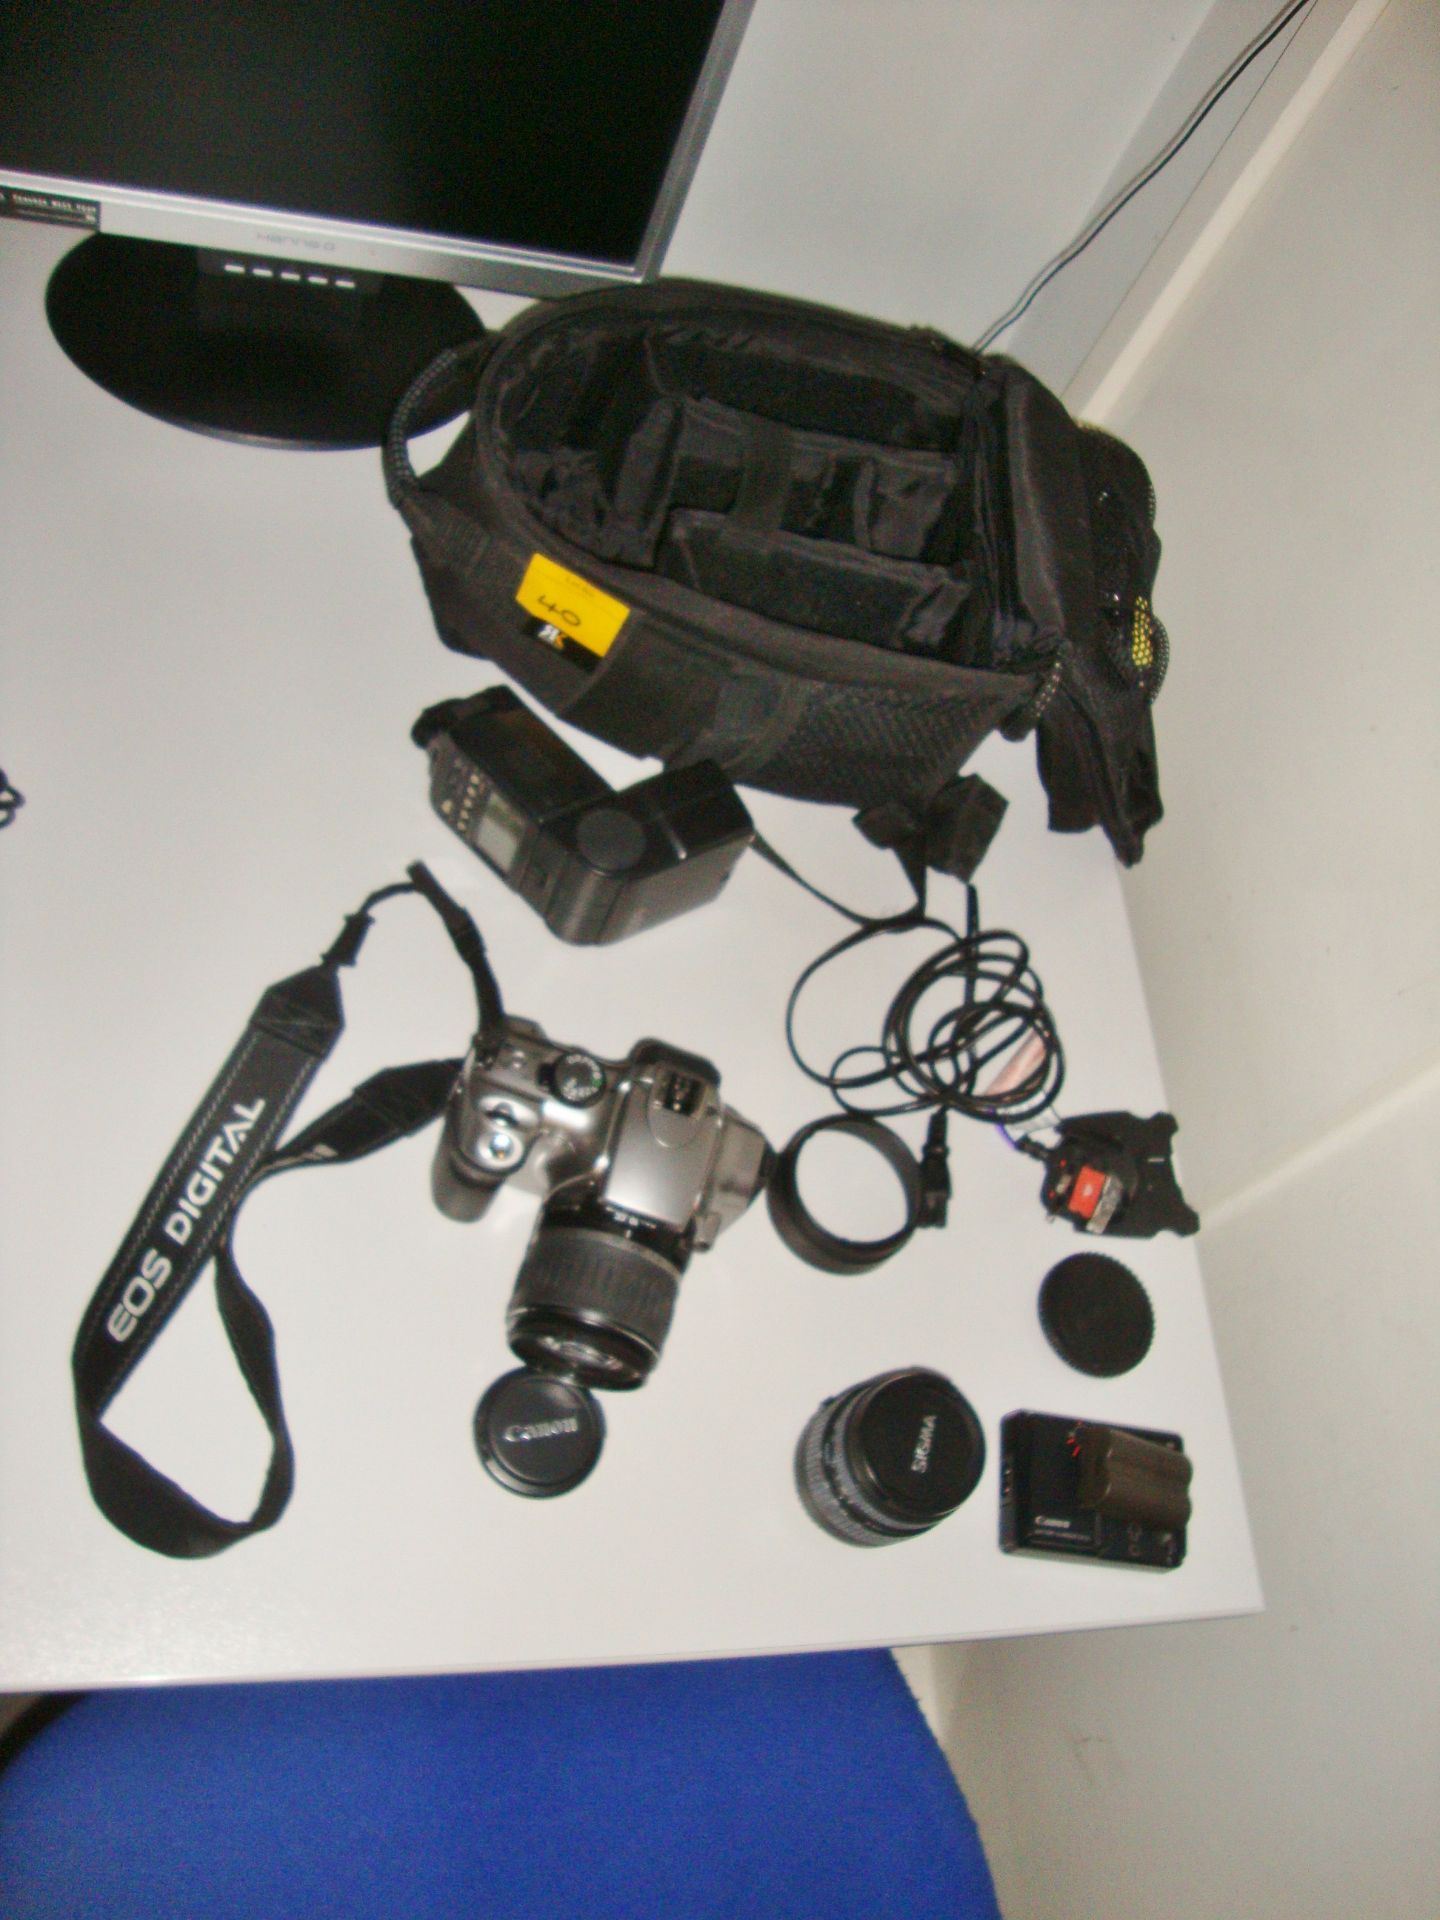 Canon 300D EOS digital SLR camera and lenses - Image 9 of 9